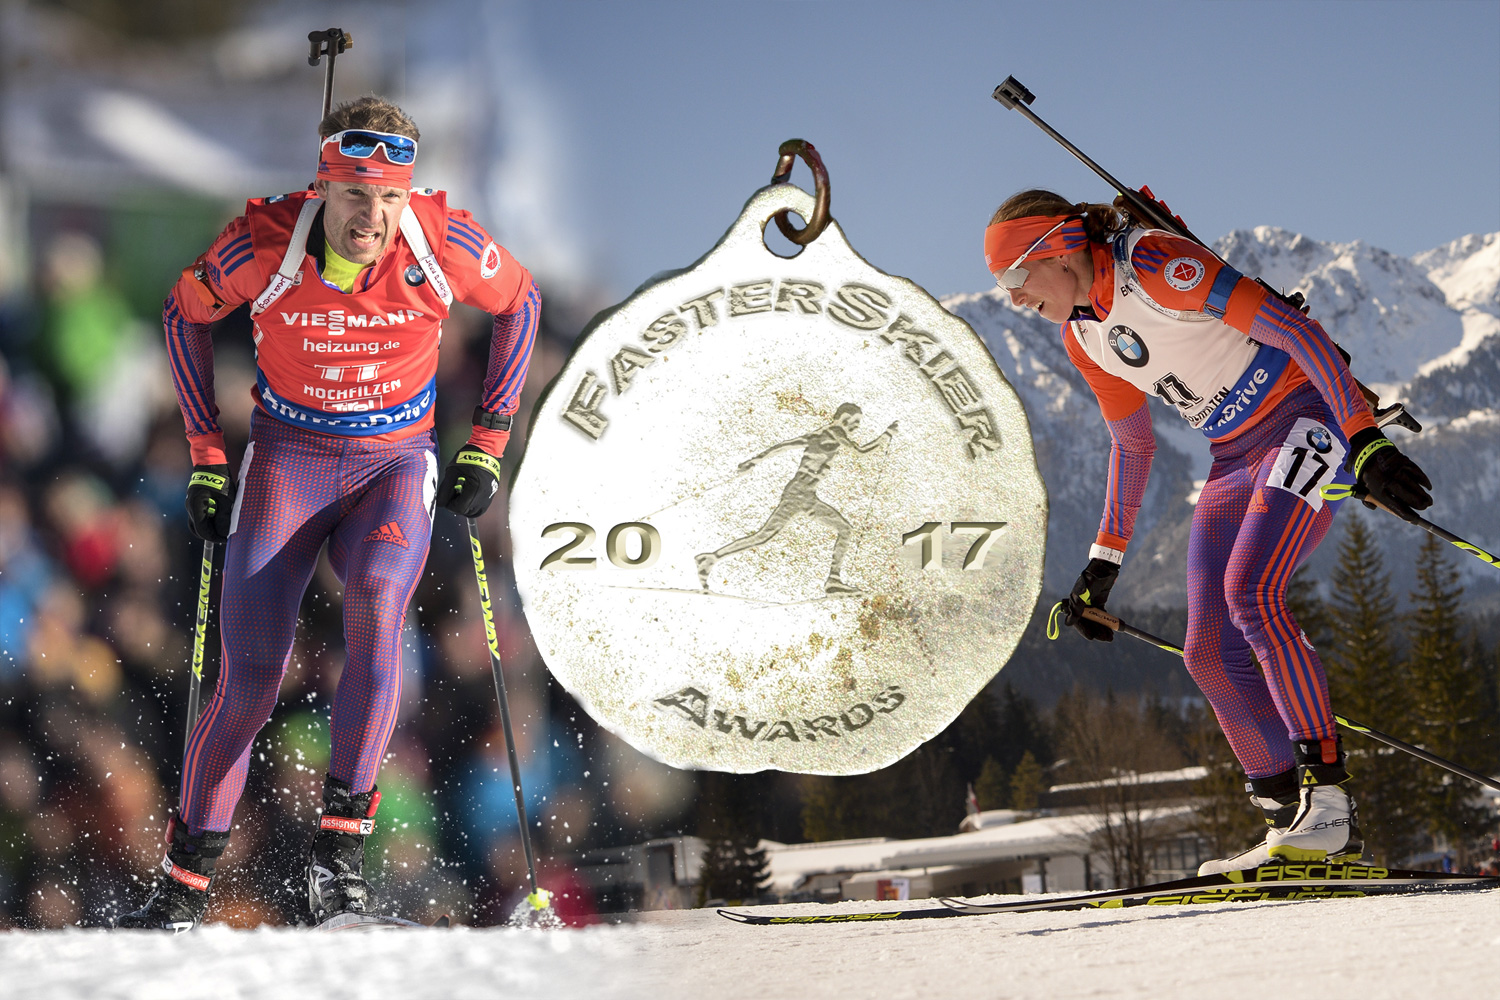 FasterSkier’s Biathletes of the Year: Lowell Bailey and Susan Dunklee